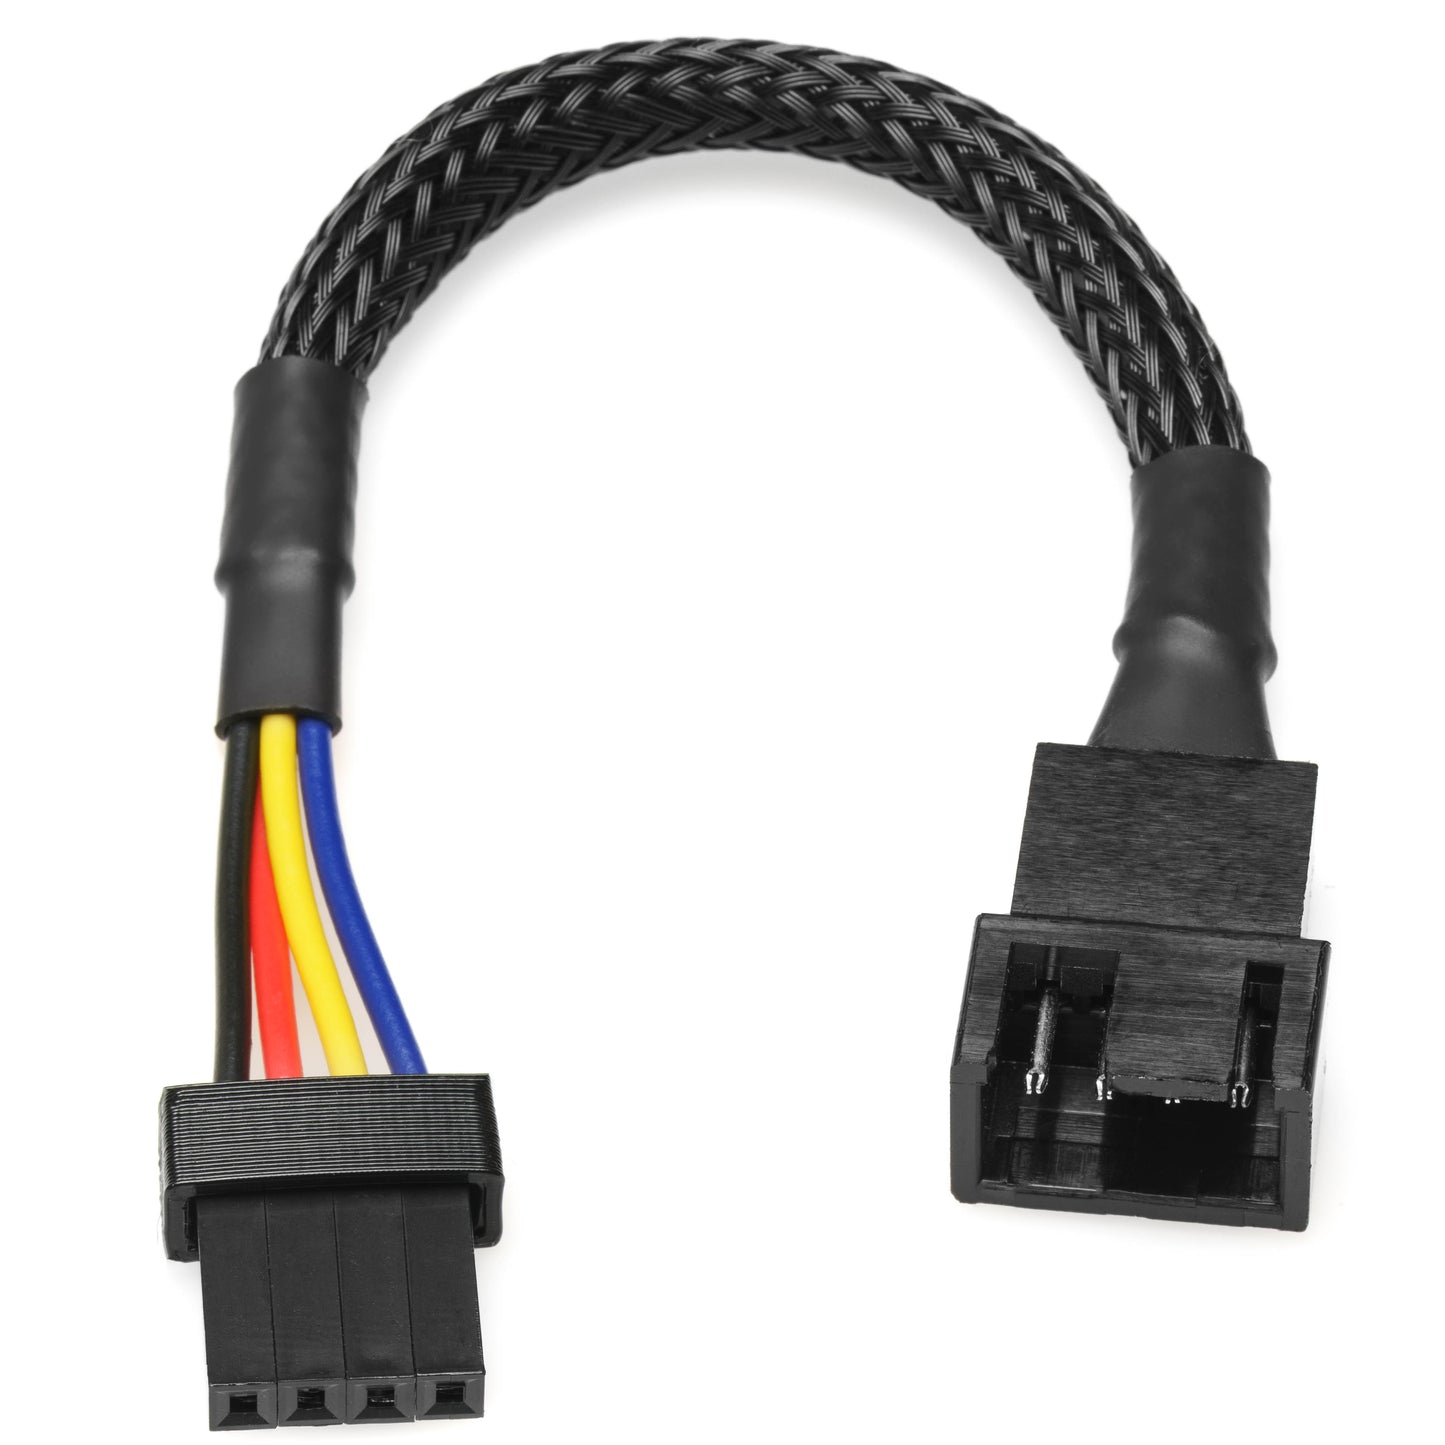 Universal 4-Pin PWM 2.54mm Breakout Adapter Cable